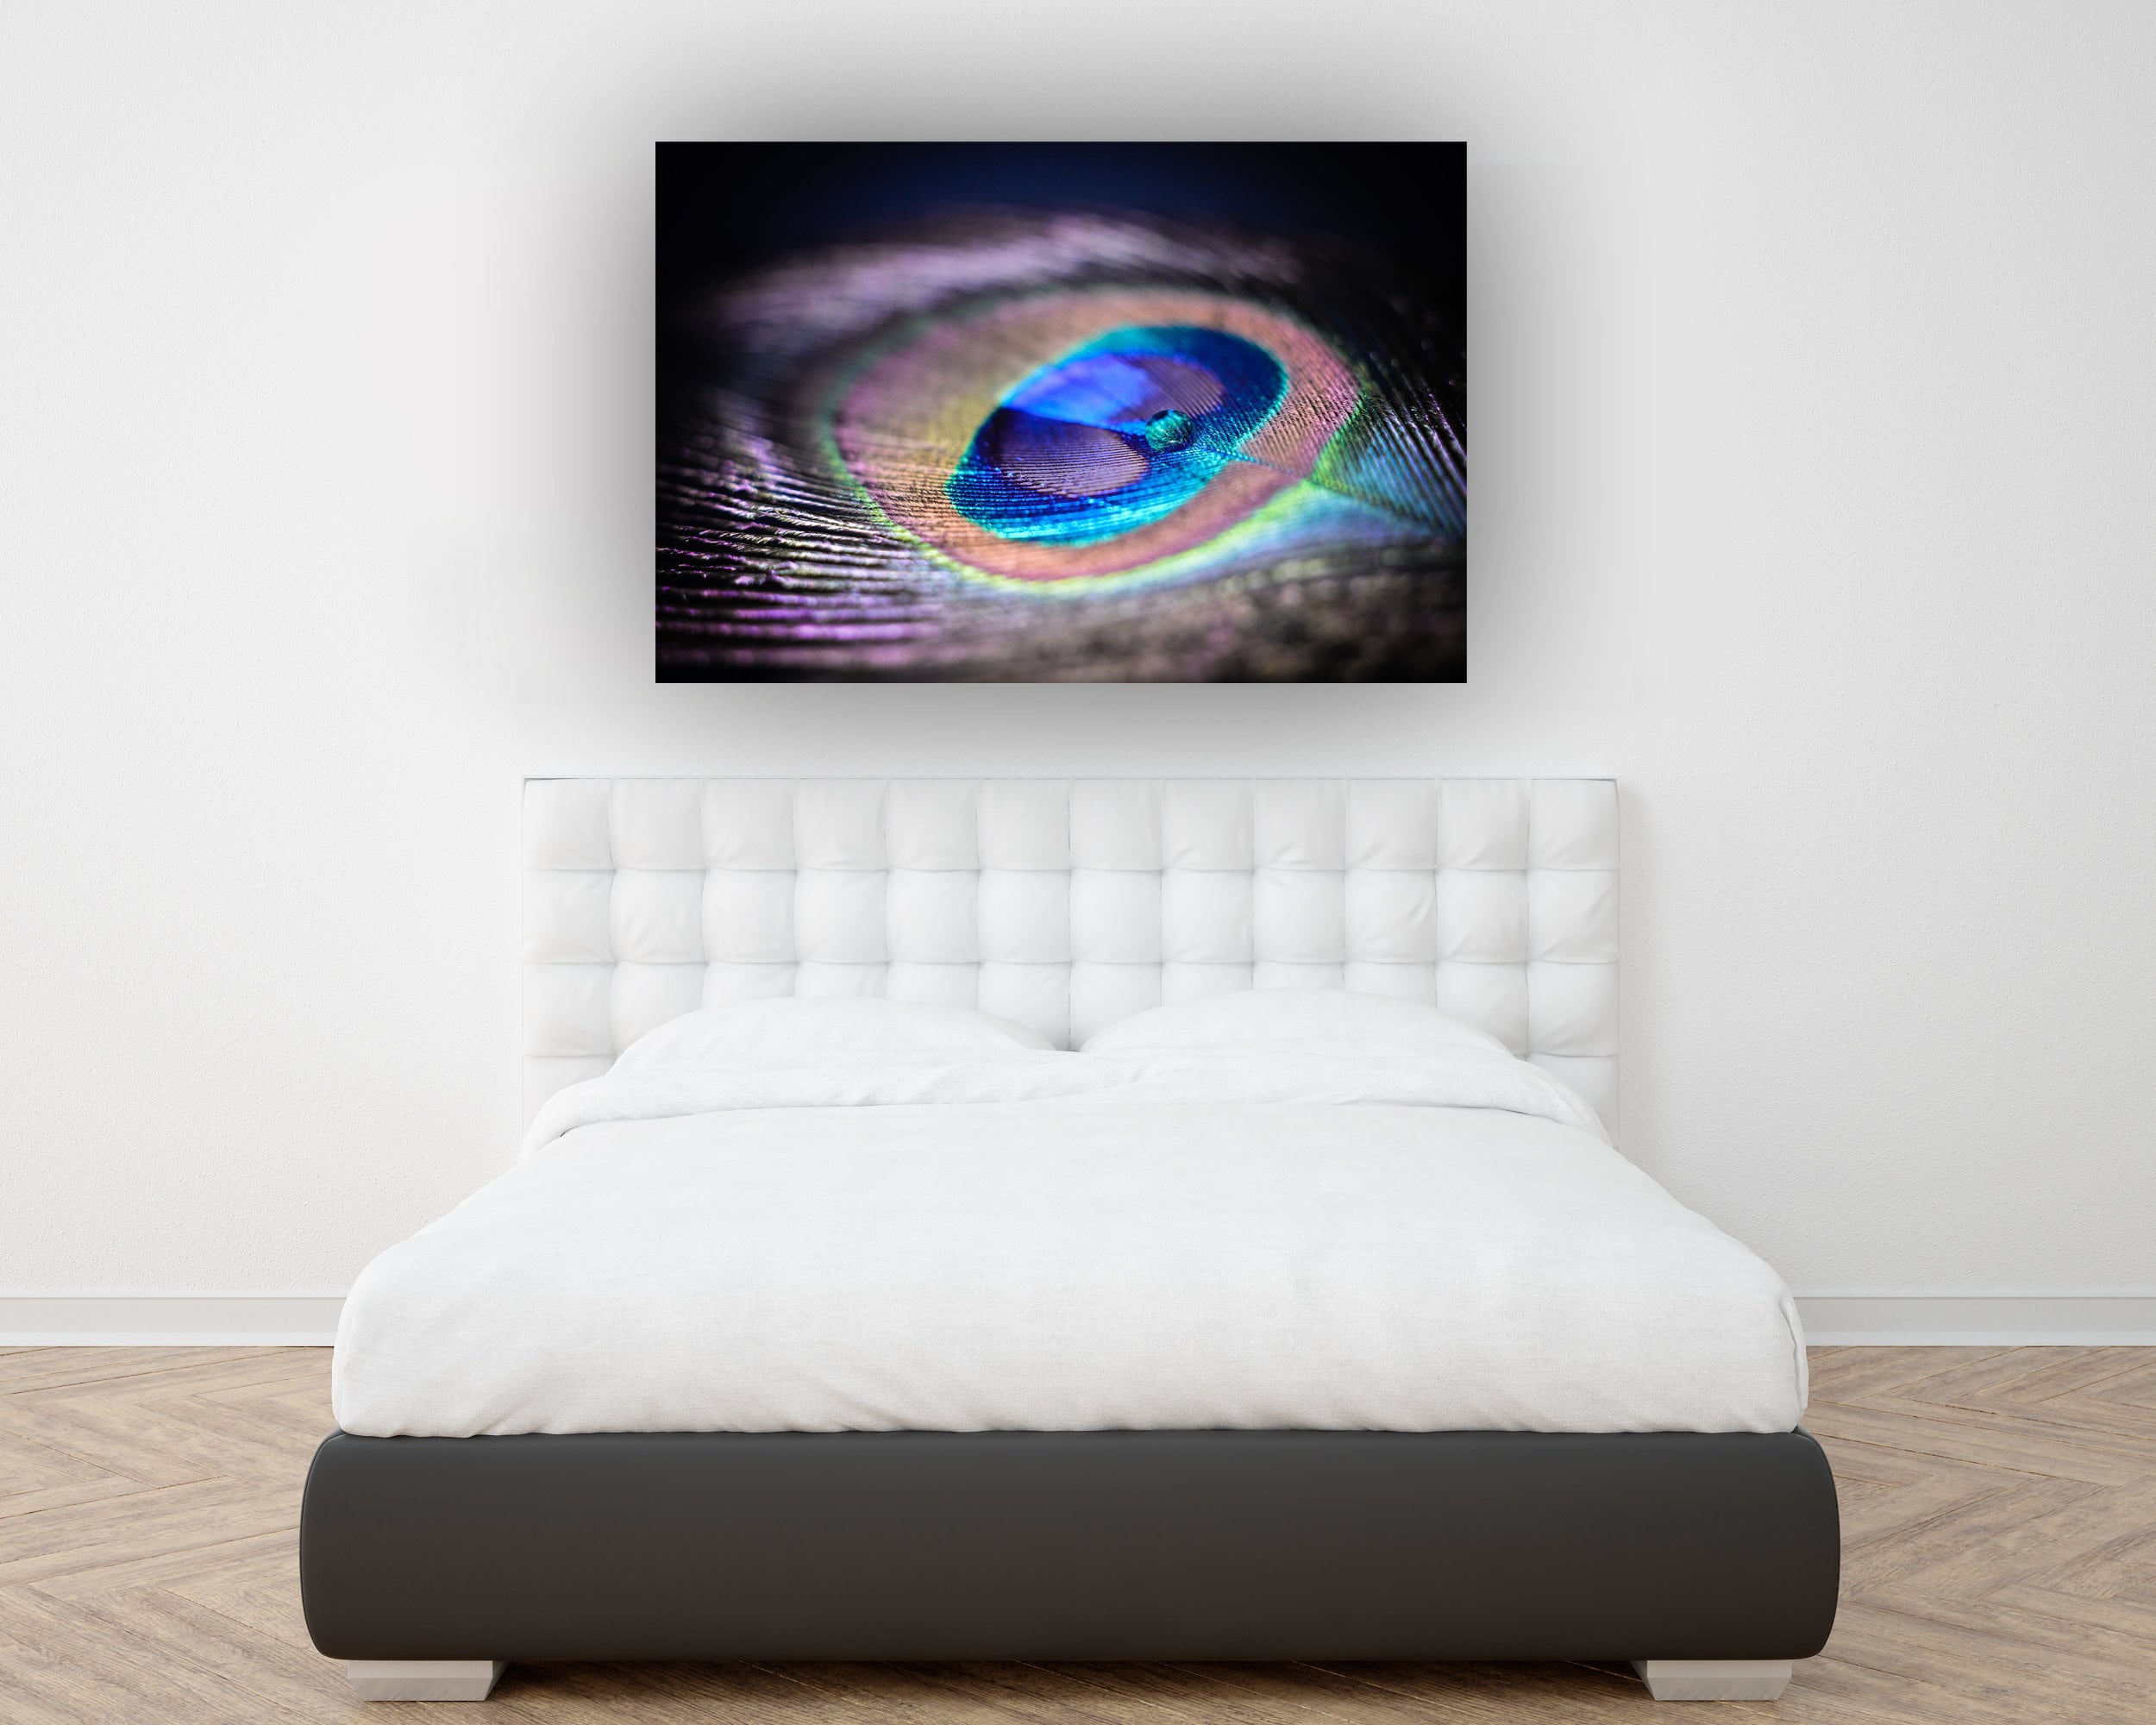 Water Drop On Peacock Feather Art Print by Miragec 